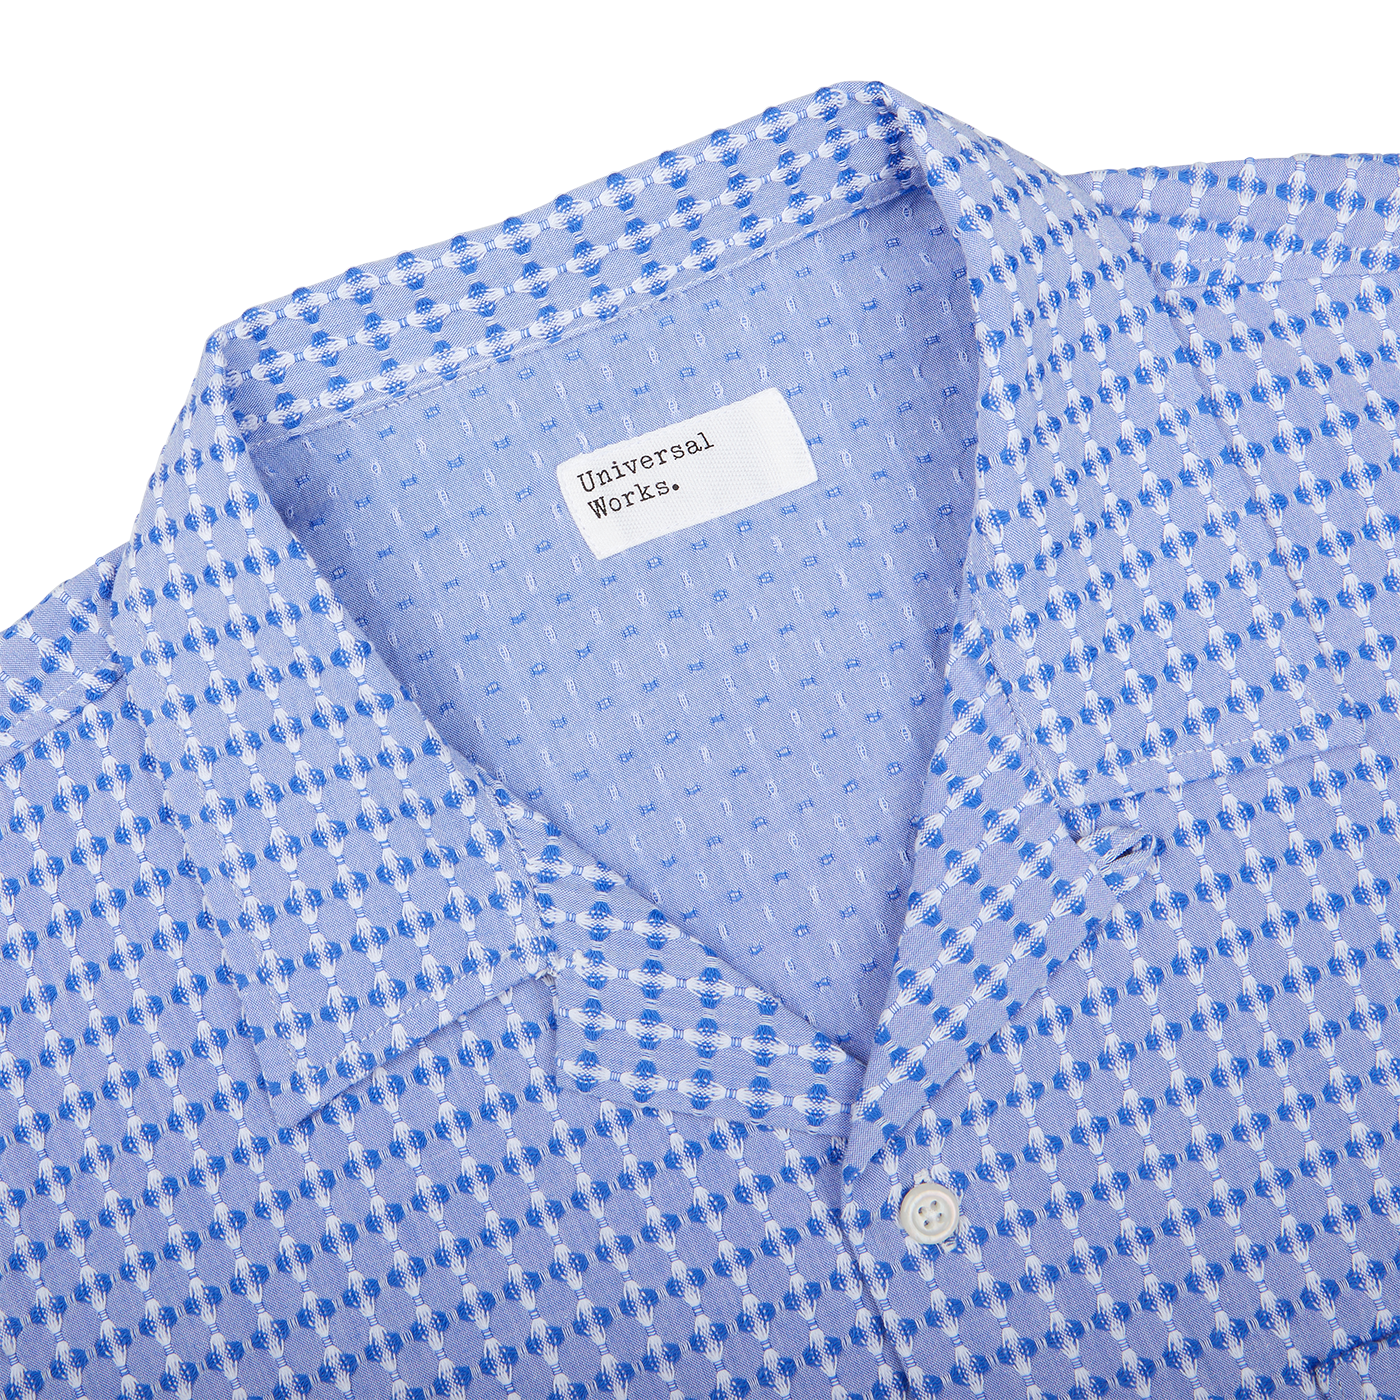 A Light Blue Cotton Camp Collar Road Shirt with a checkered pattern from Universal Works.